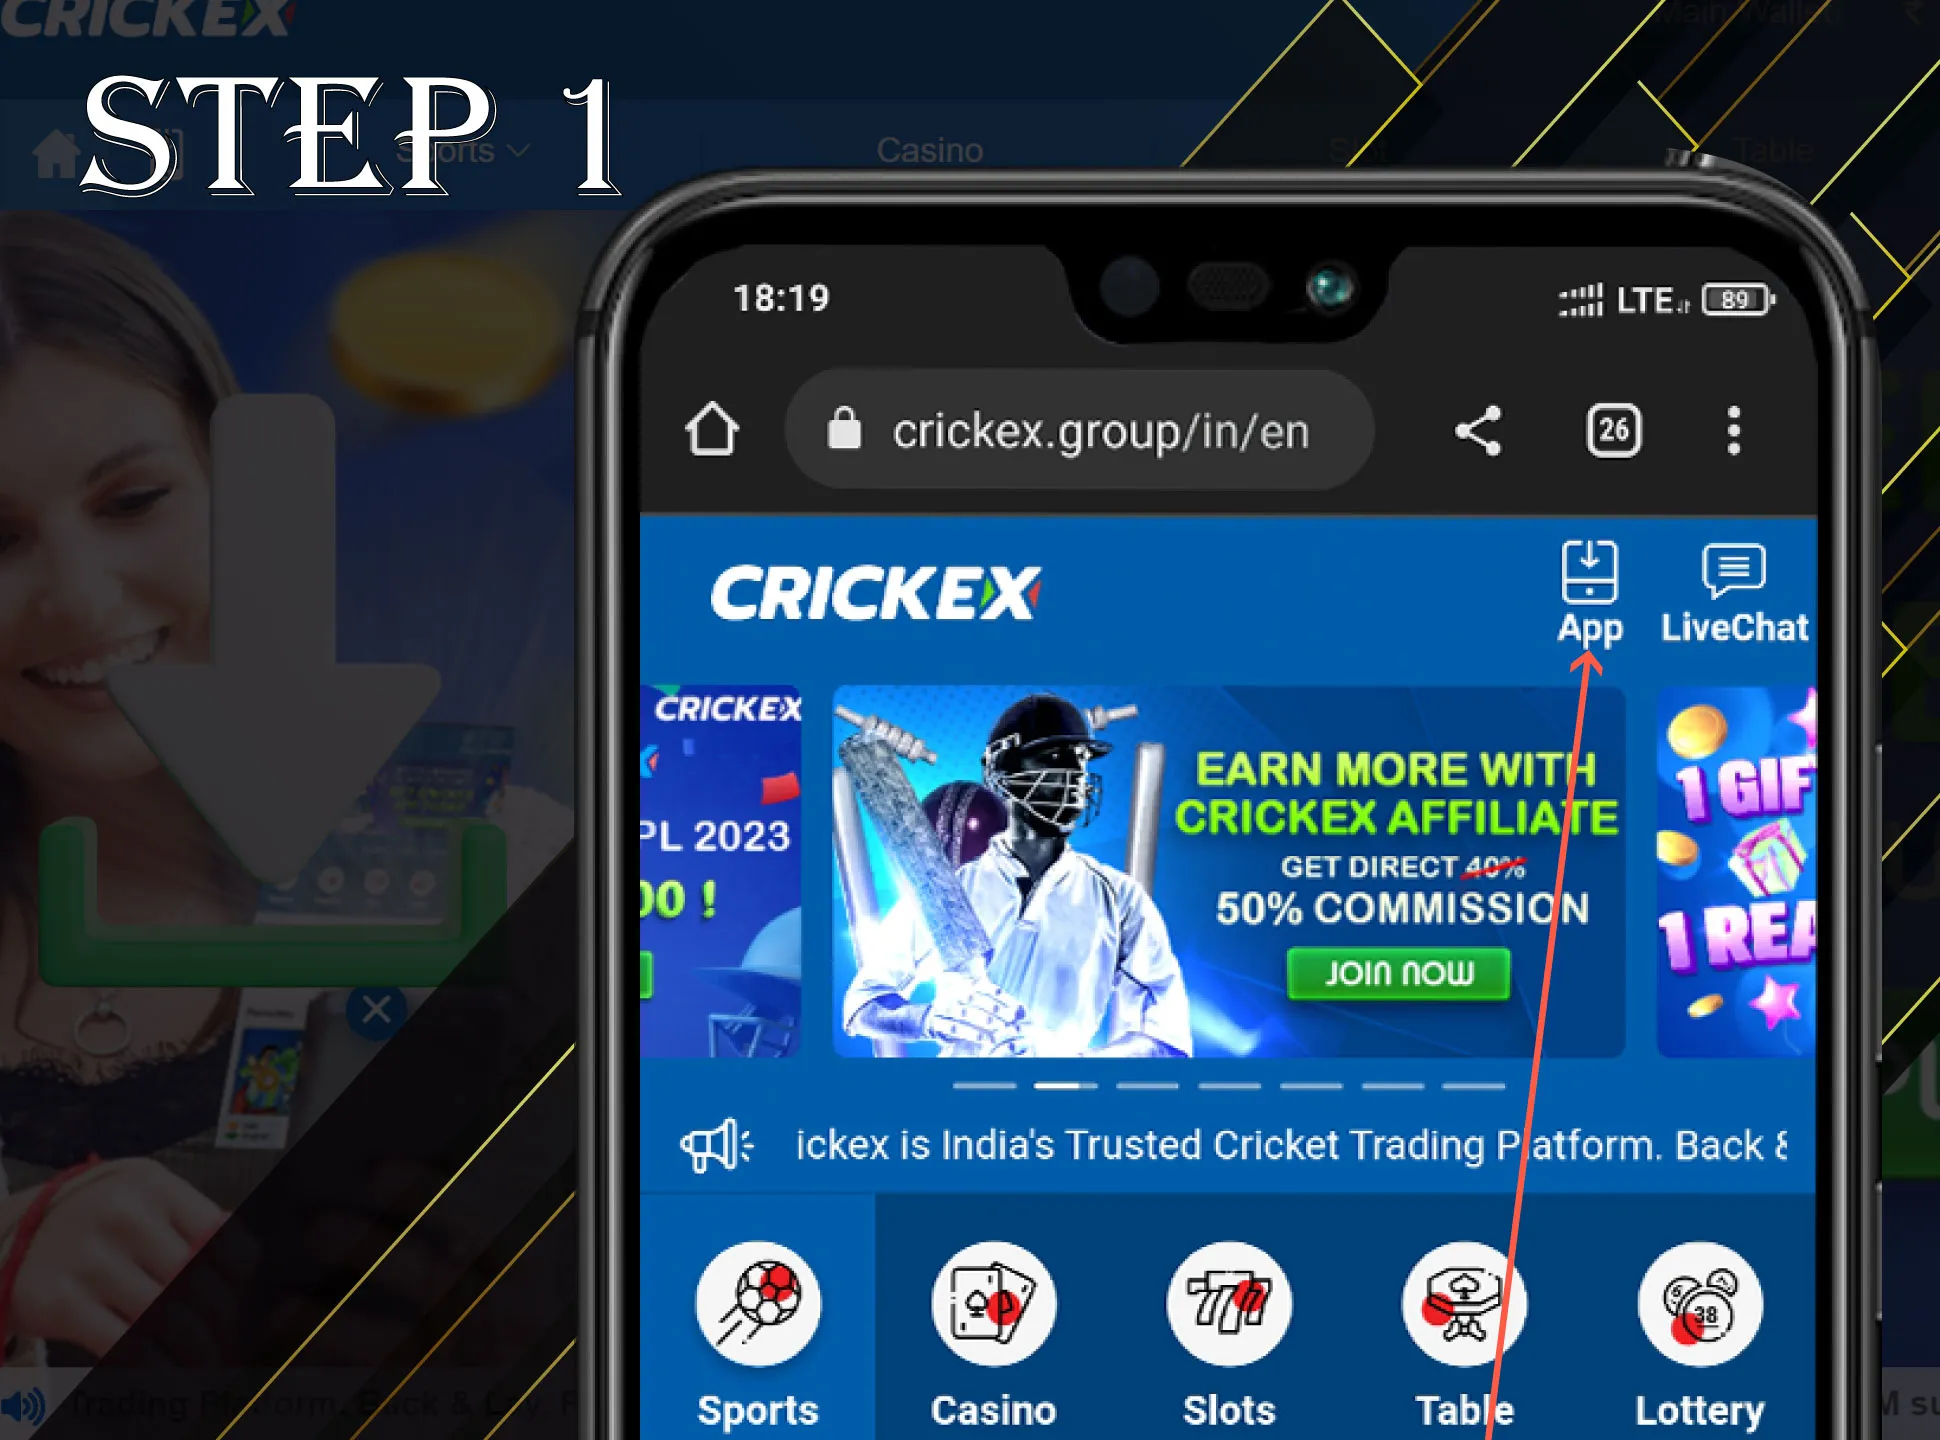 Open the Crickex website and find the download button.